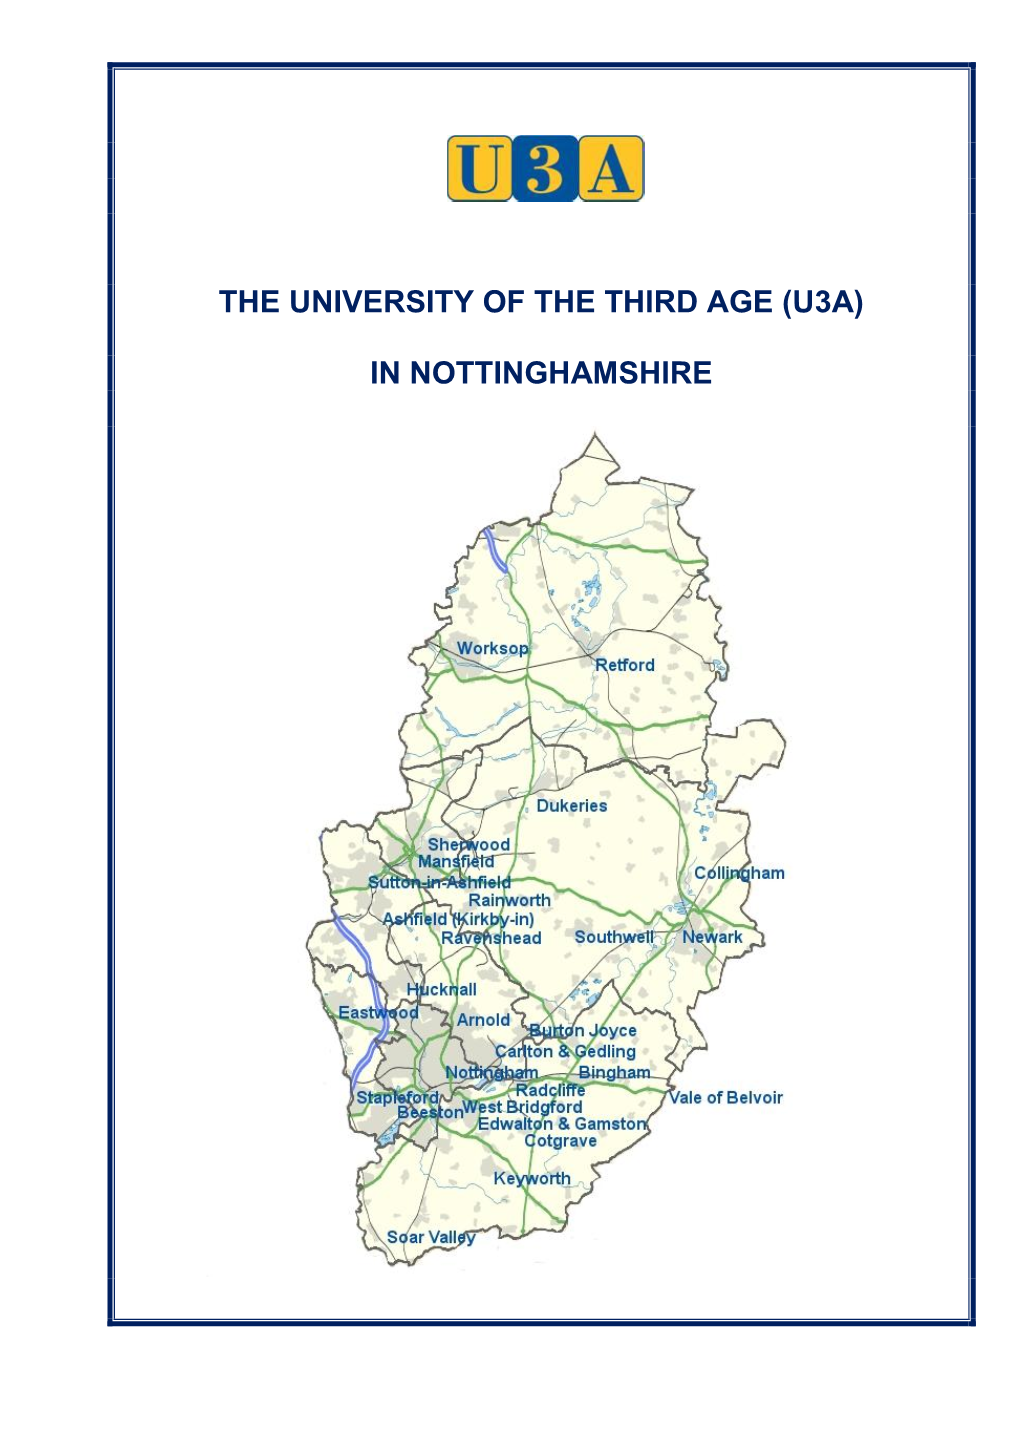 University of the Third Age (U3A) in Nottinghamshire